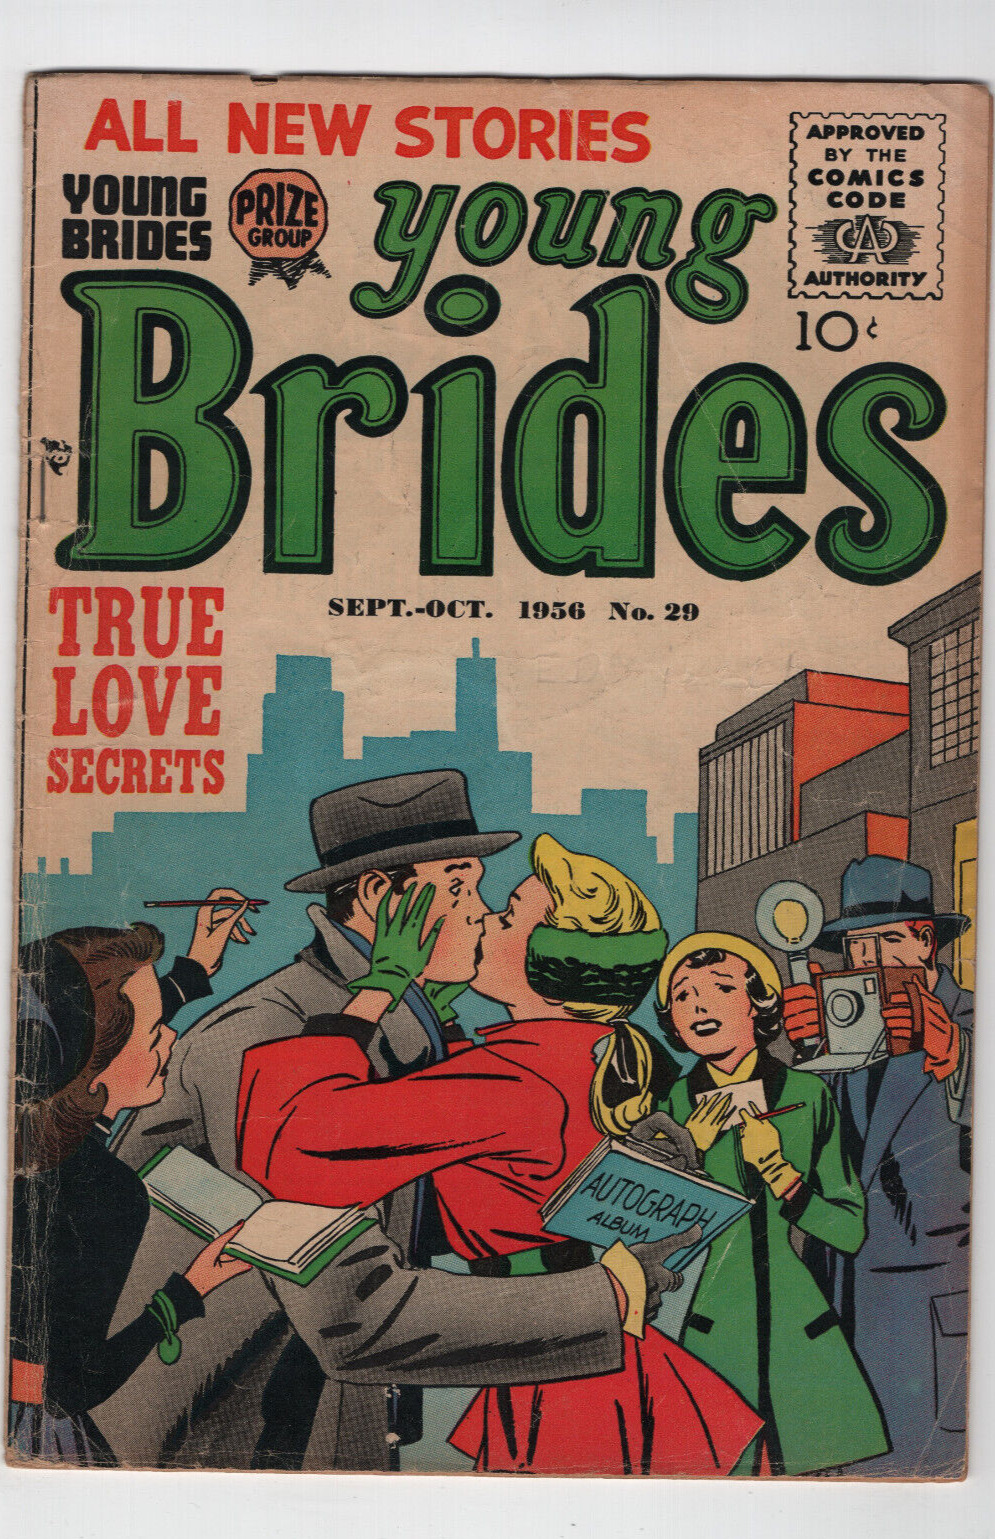 Young Brides #29 Early Jack Kirby Cover/Art PRIZE Comics 1956 Golden Age Romance